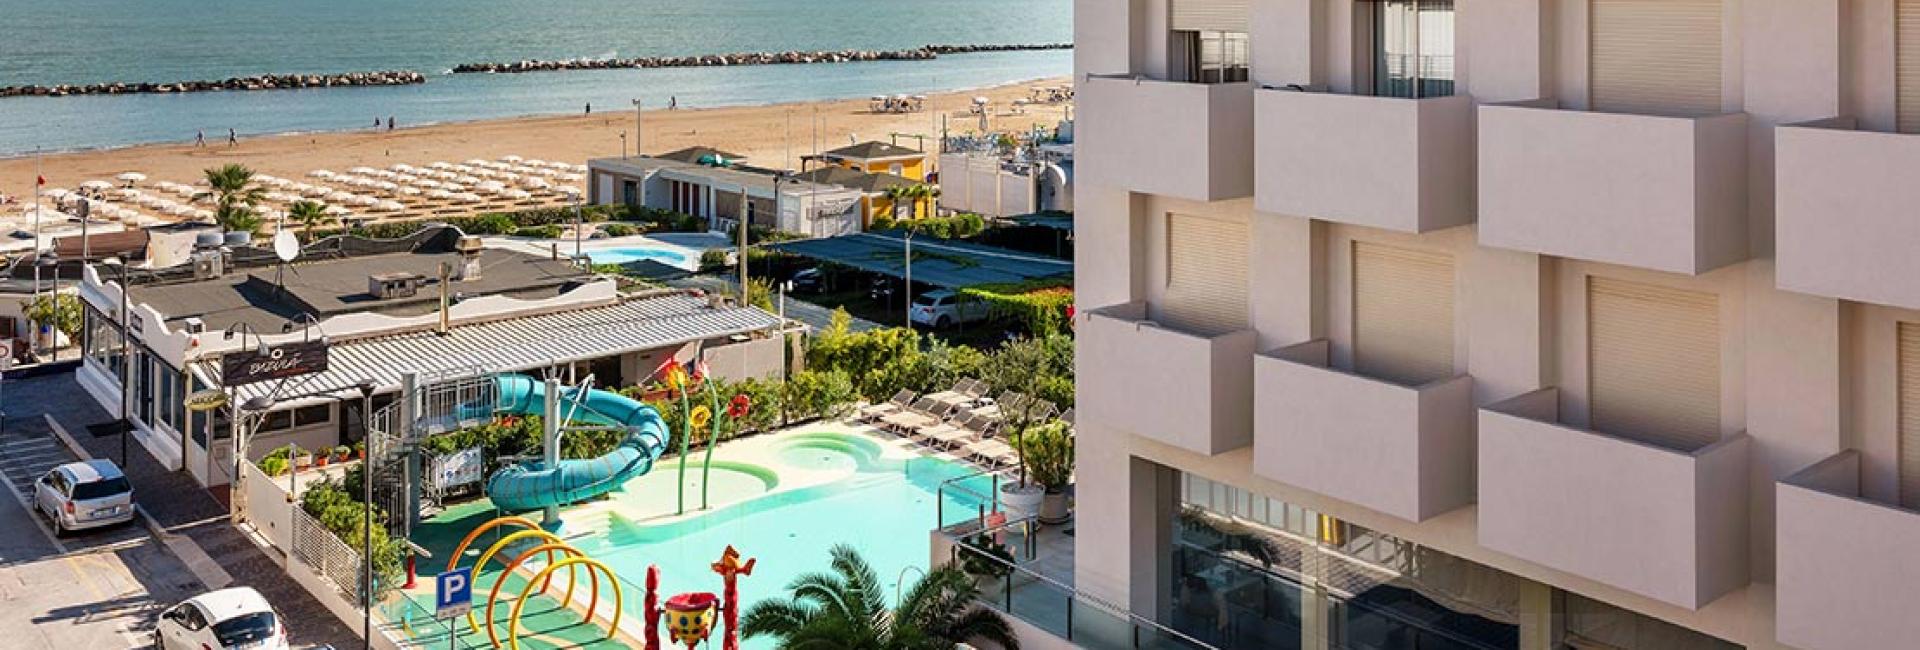 cattolicafamilyresort fr offre-paques-a-la-mer-a-cattolica 010